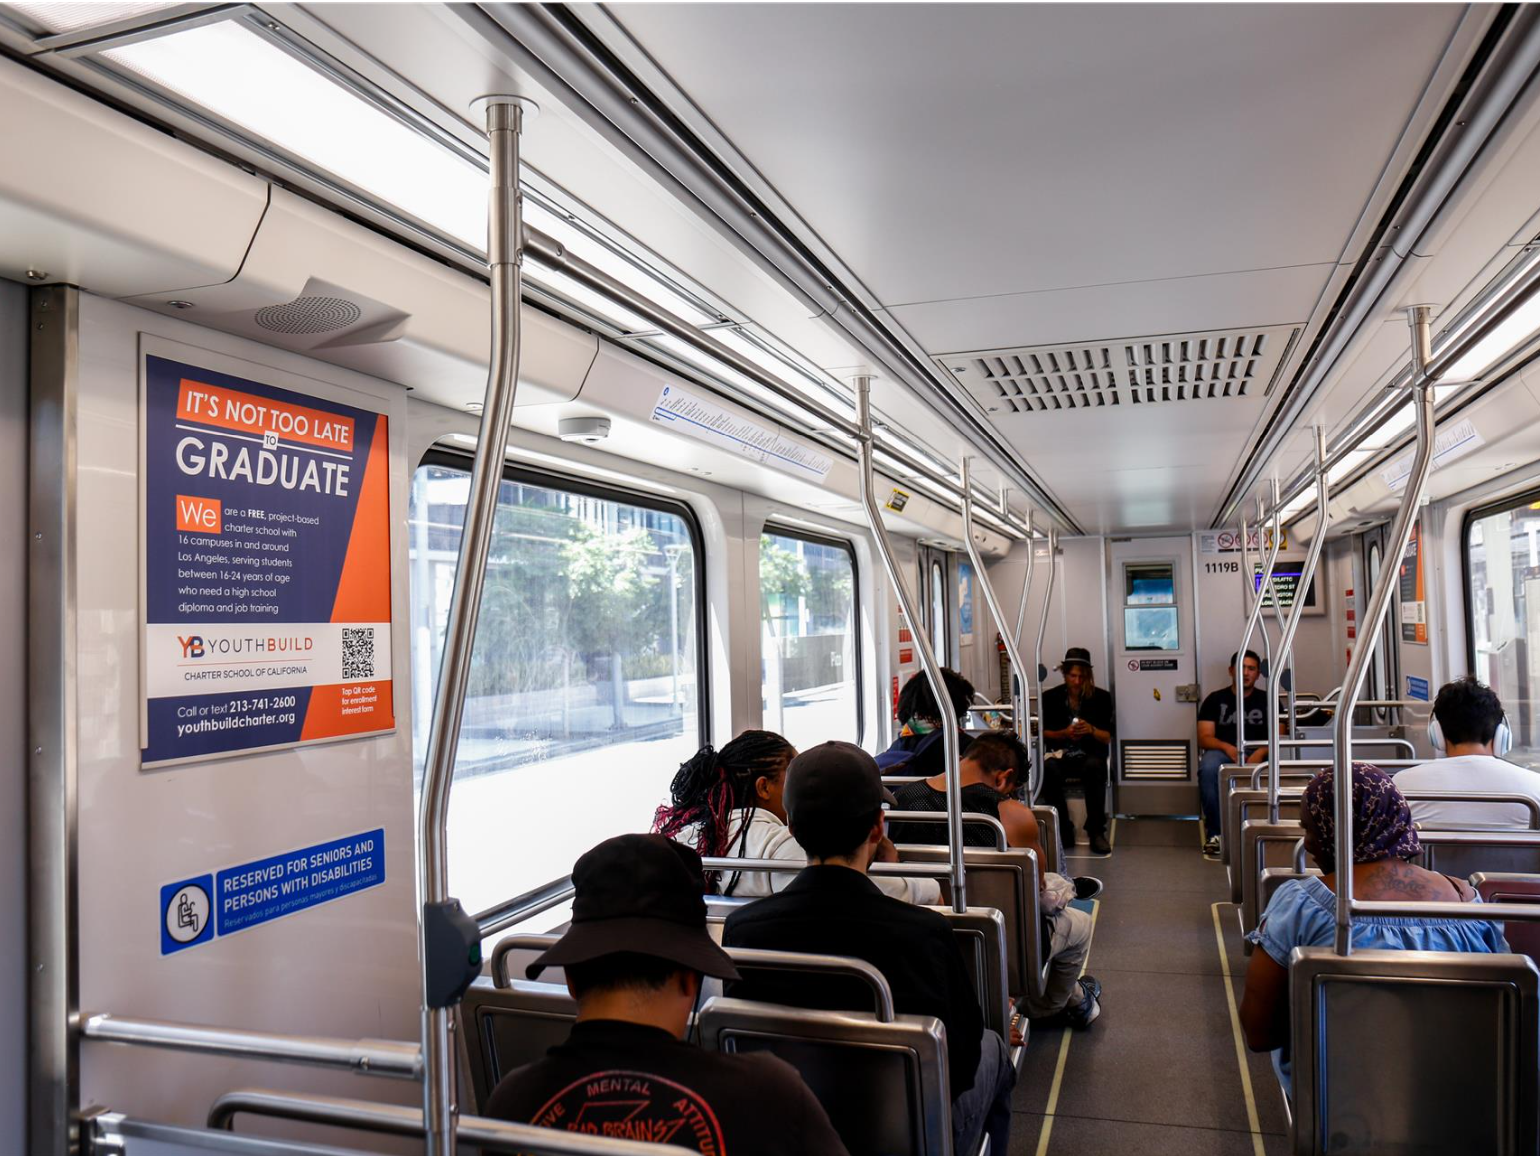 Metro rail riders on a train with our ad